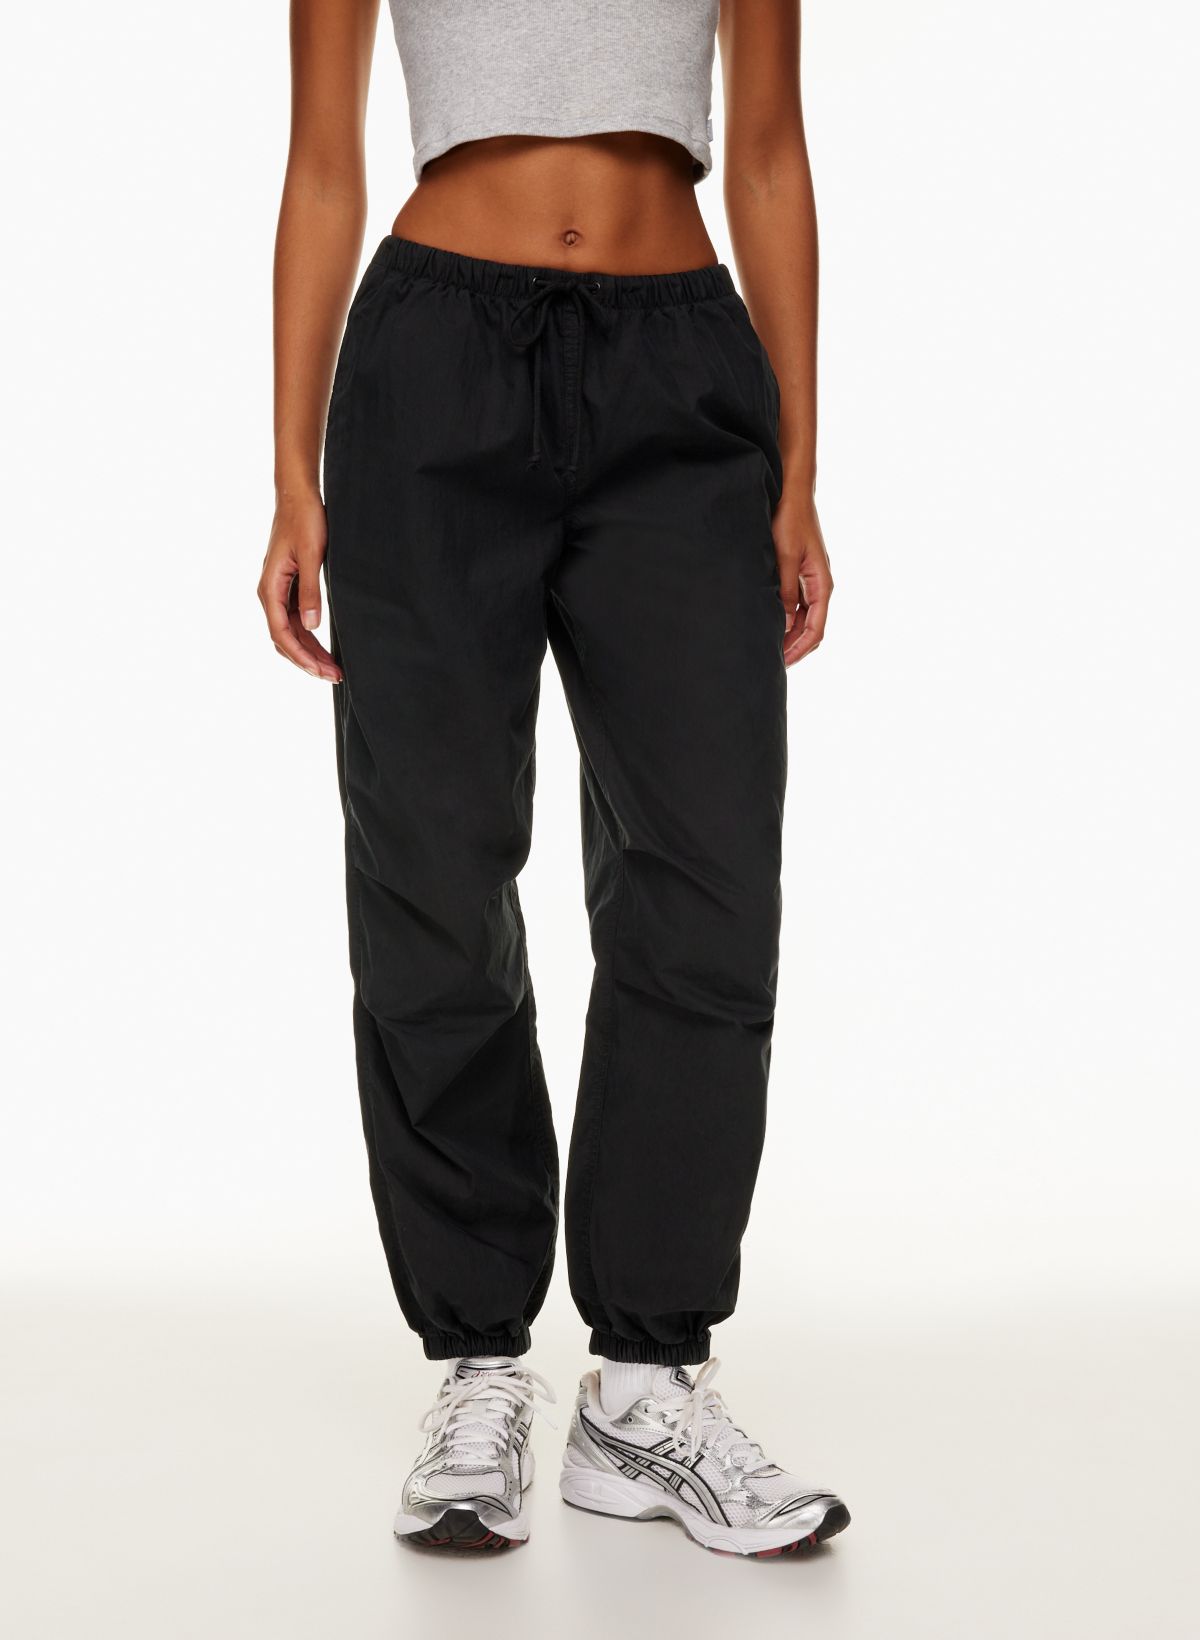 Nike parachute pants Black - $35 (41% Off Retail) - From Alexis